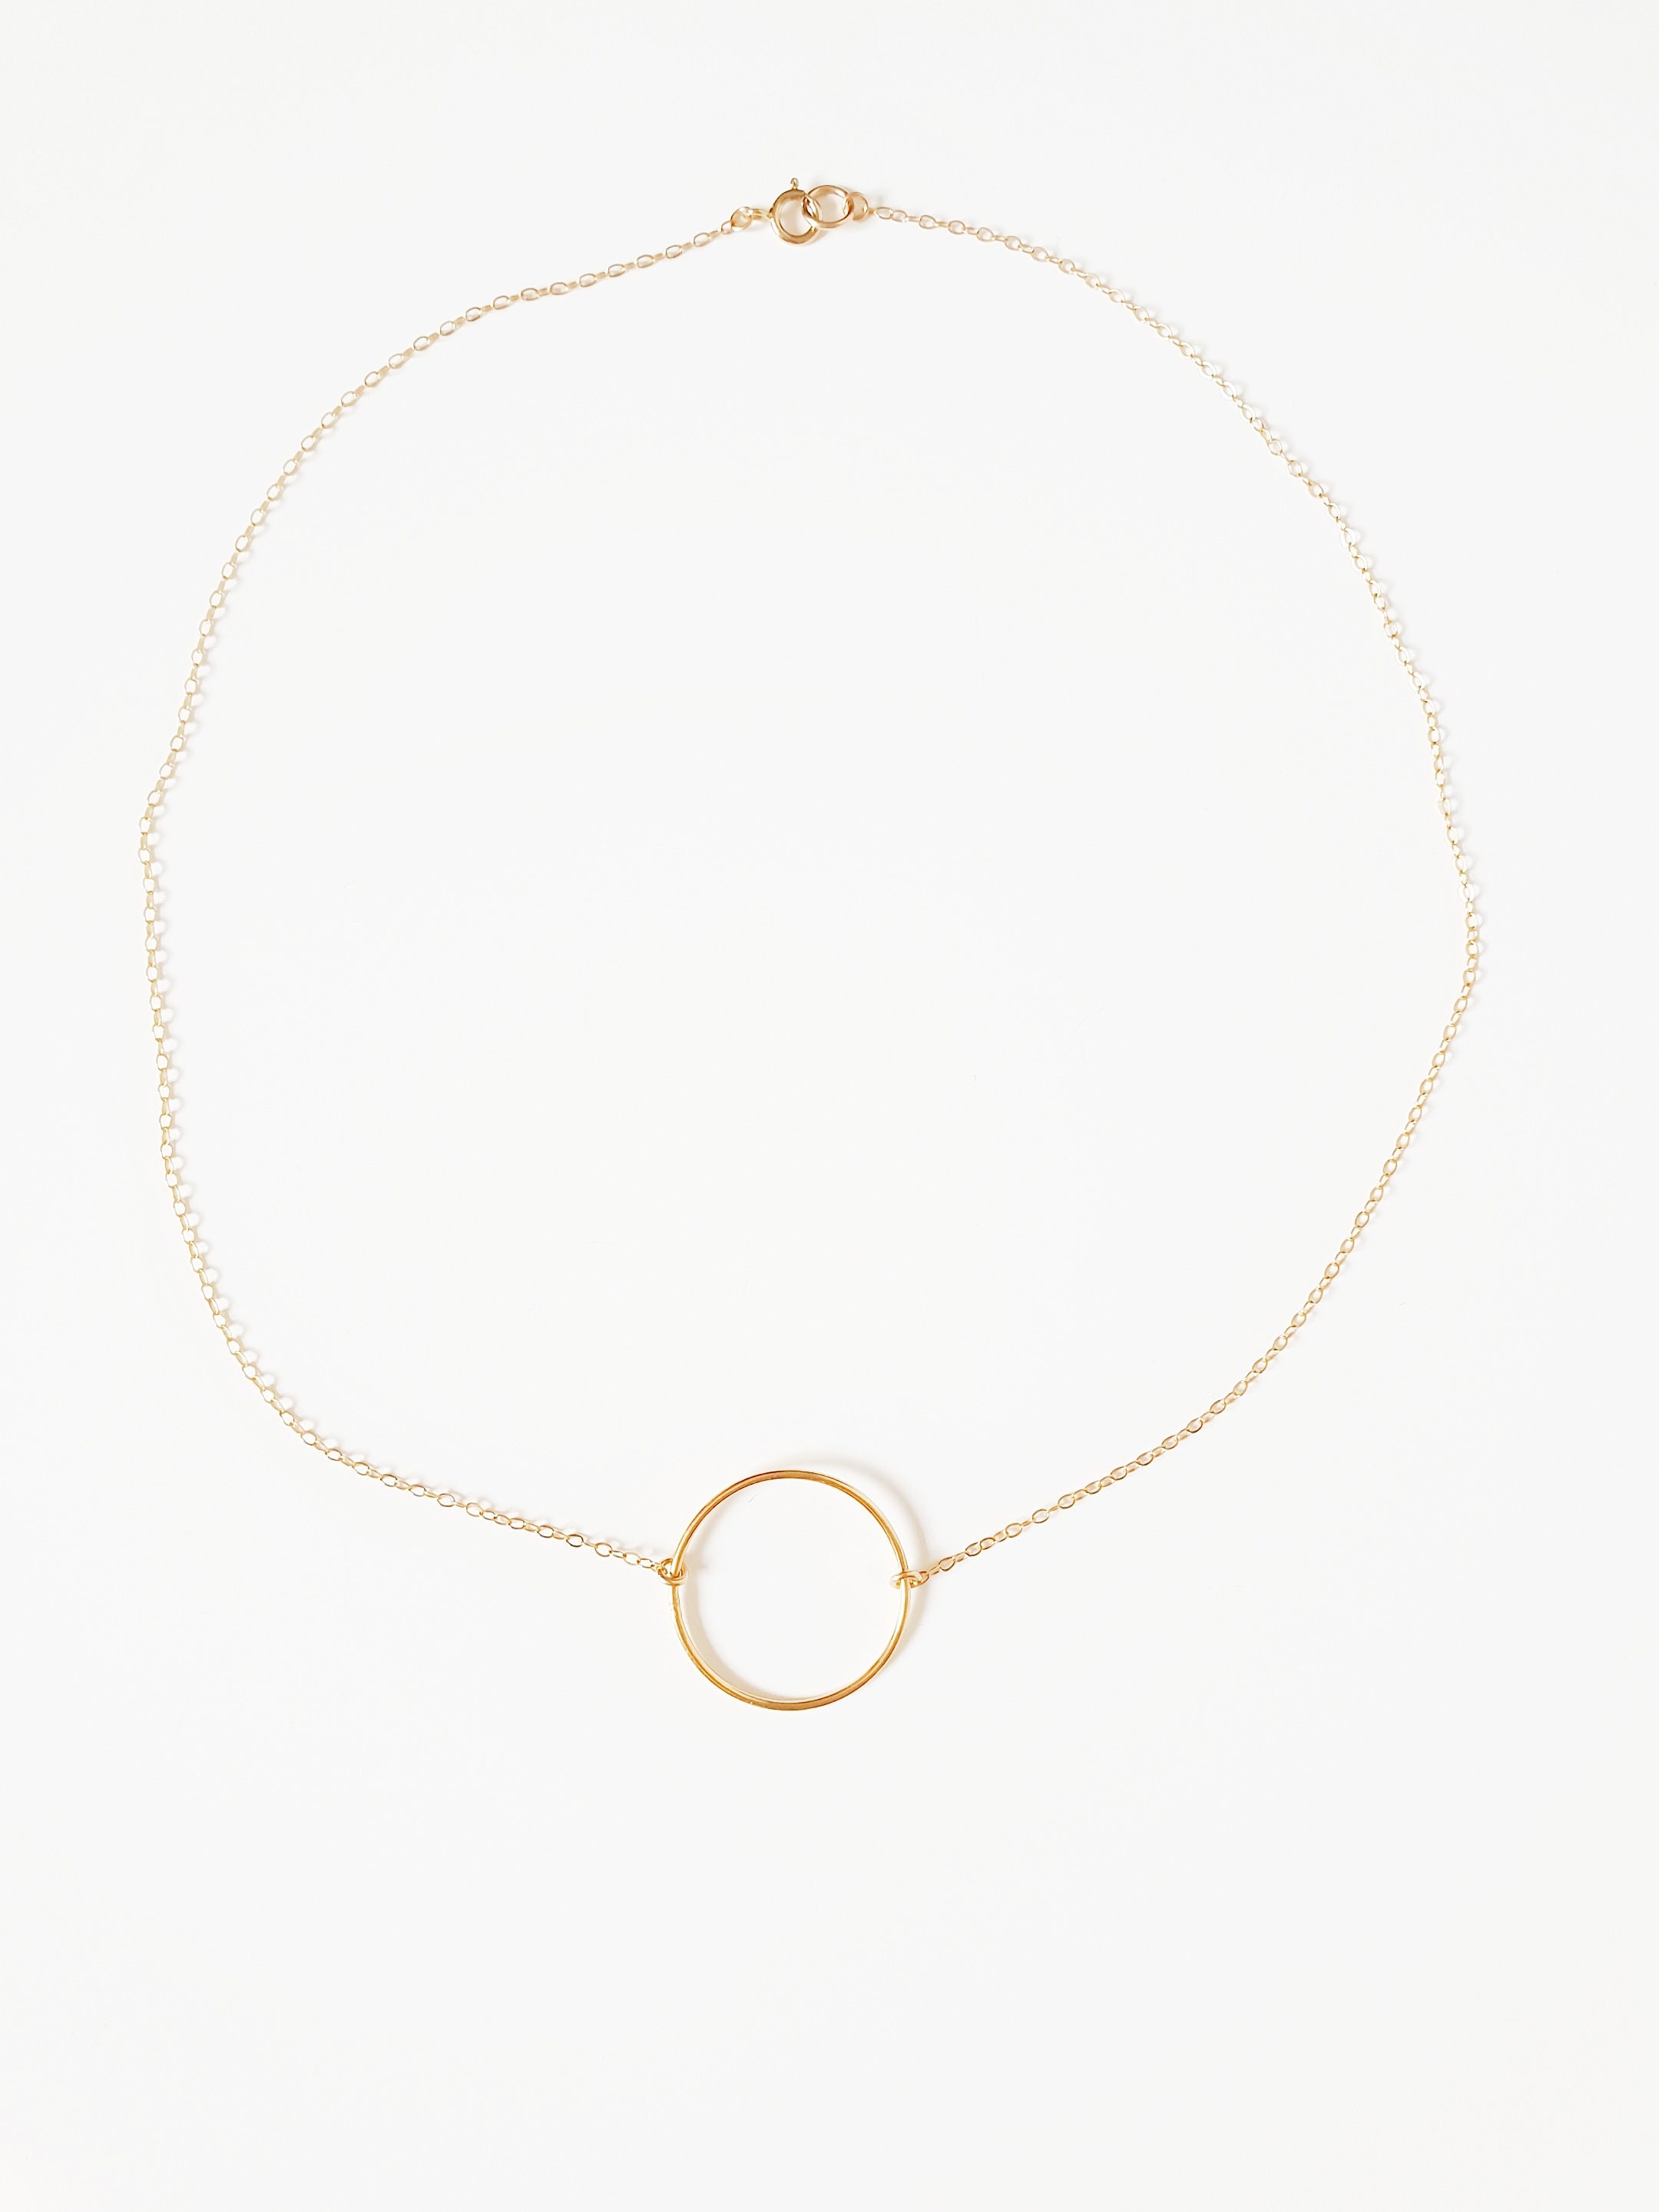 Circle Gold Necklace Minimalist and Dainty Necklace | Etsy